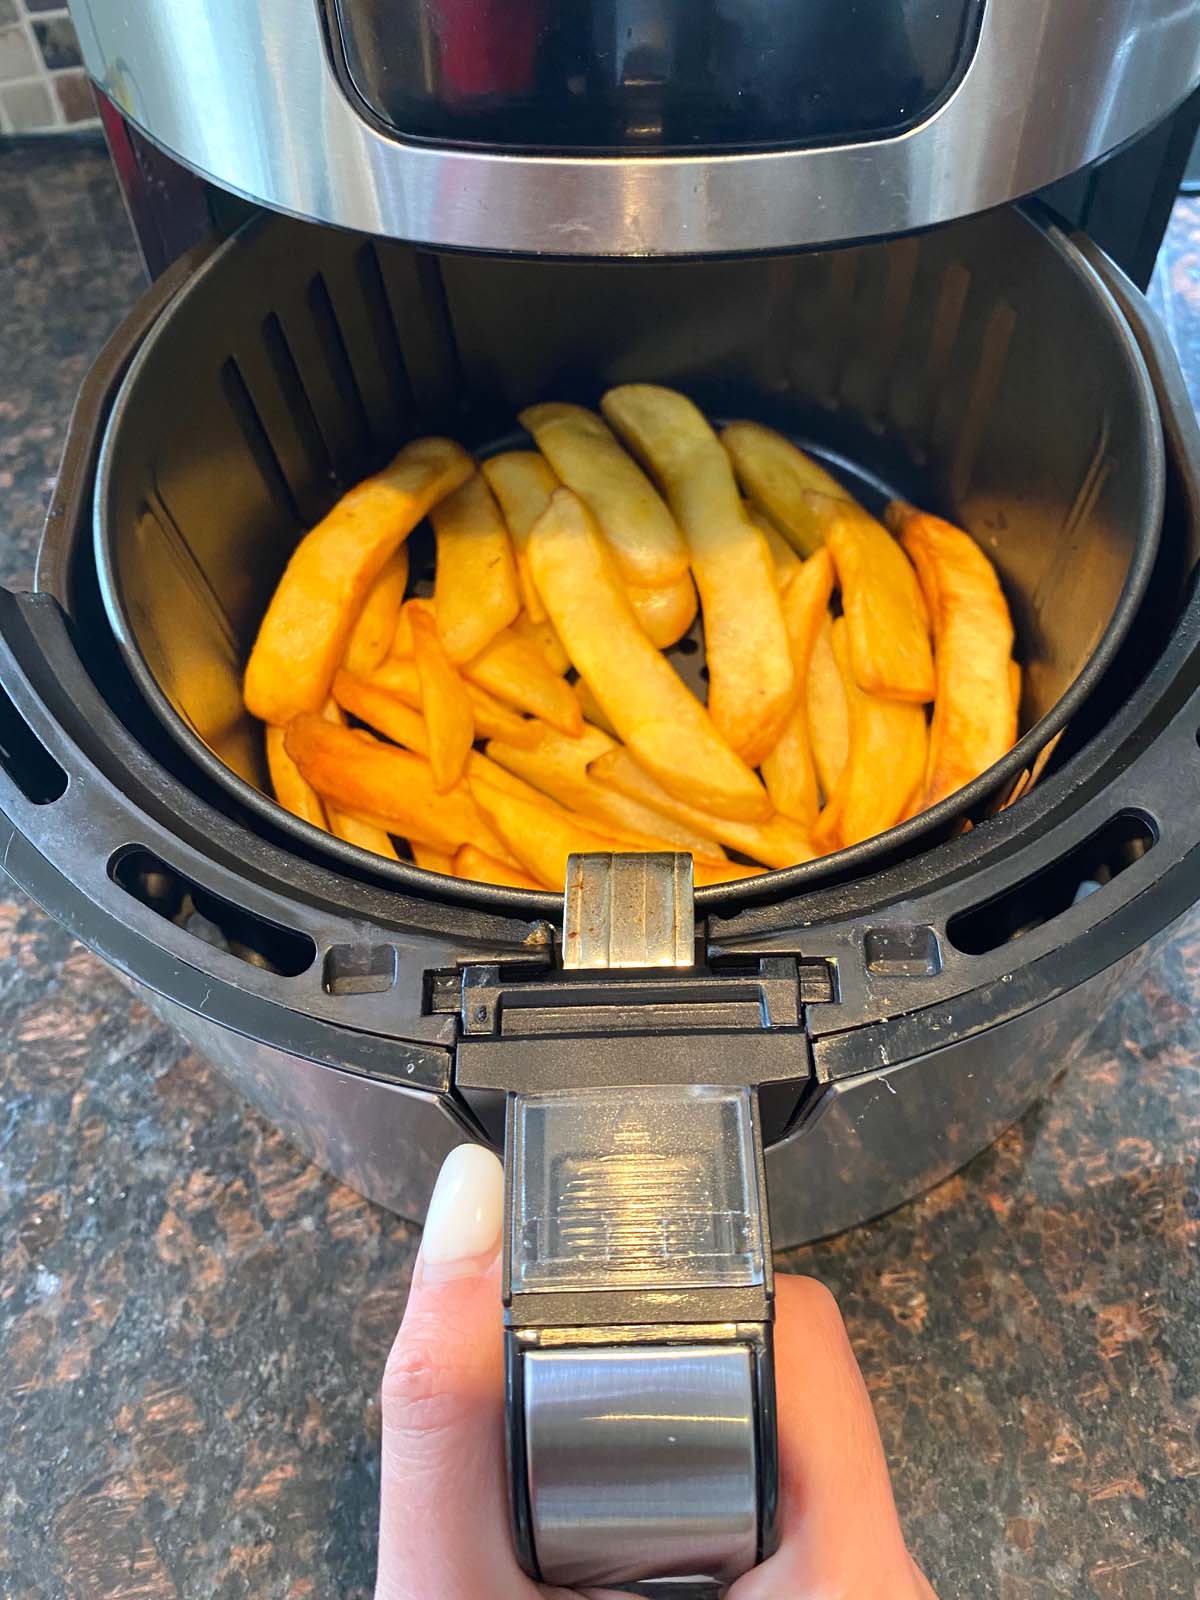 Cooked steak fries in an air fryer. 